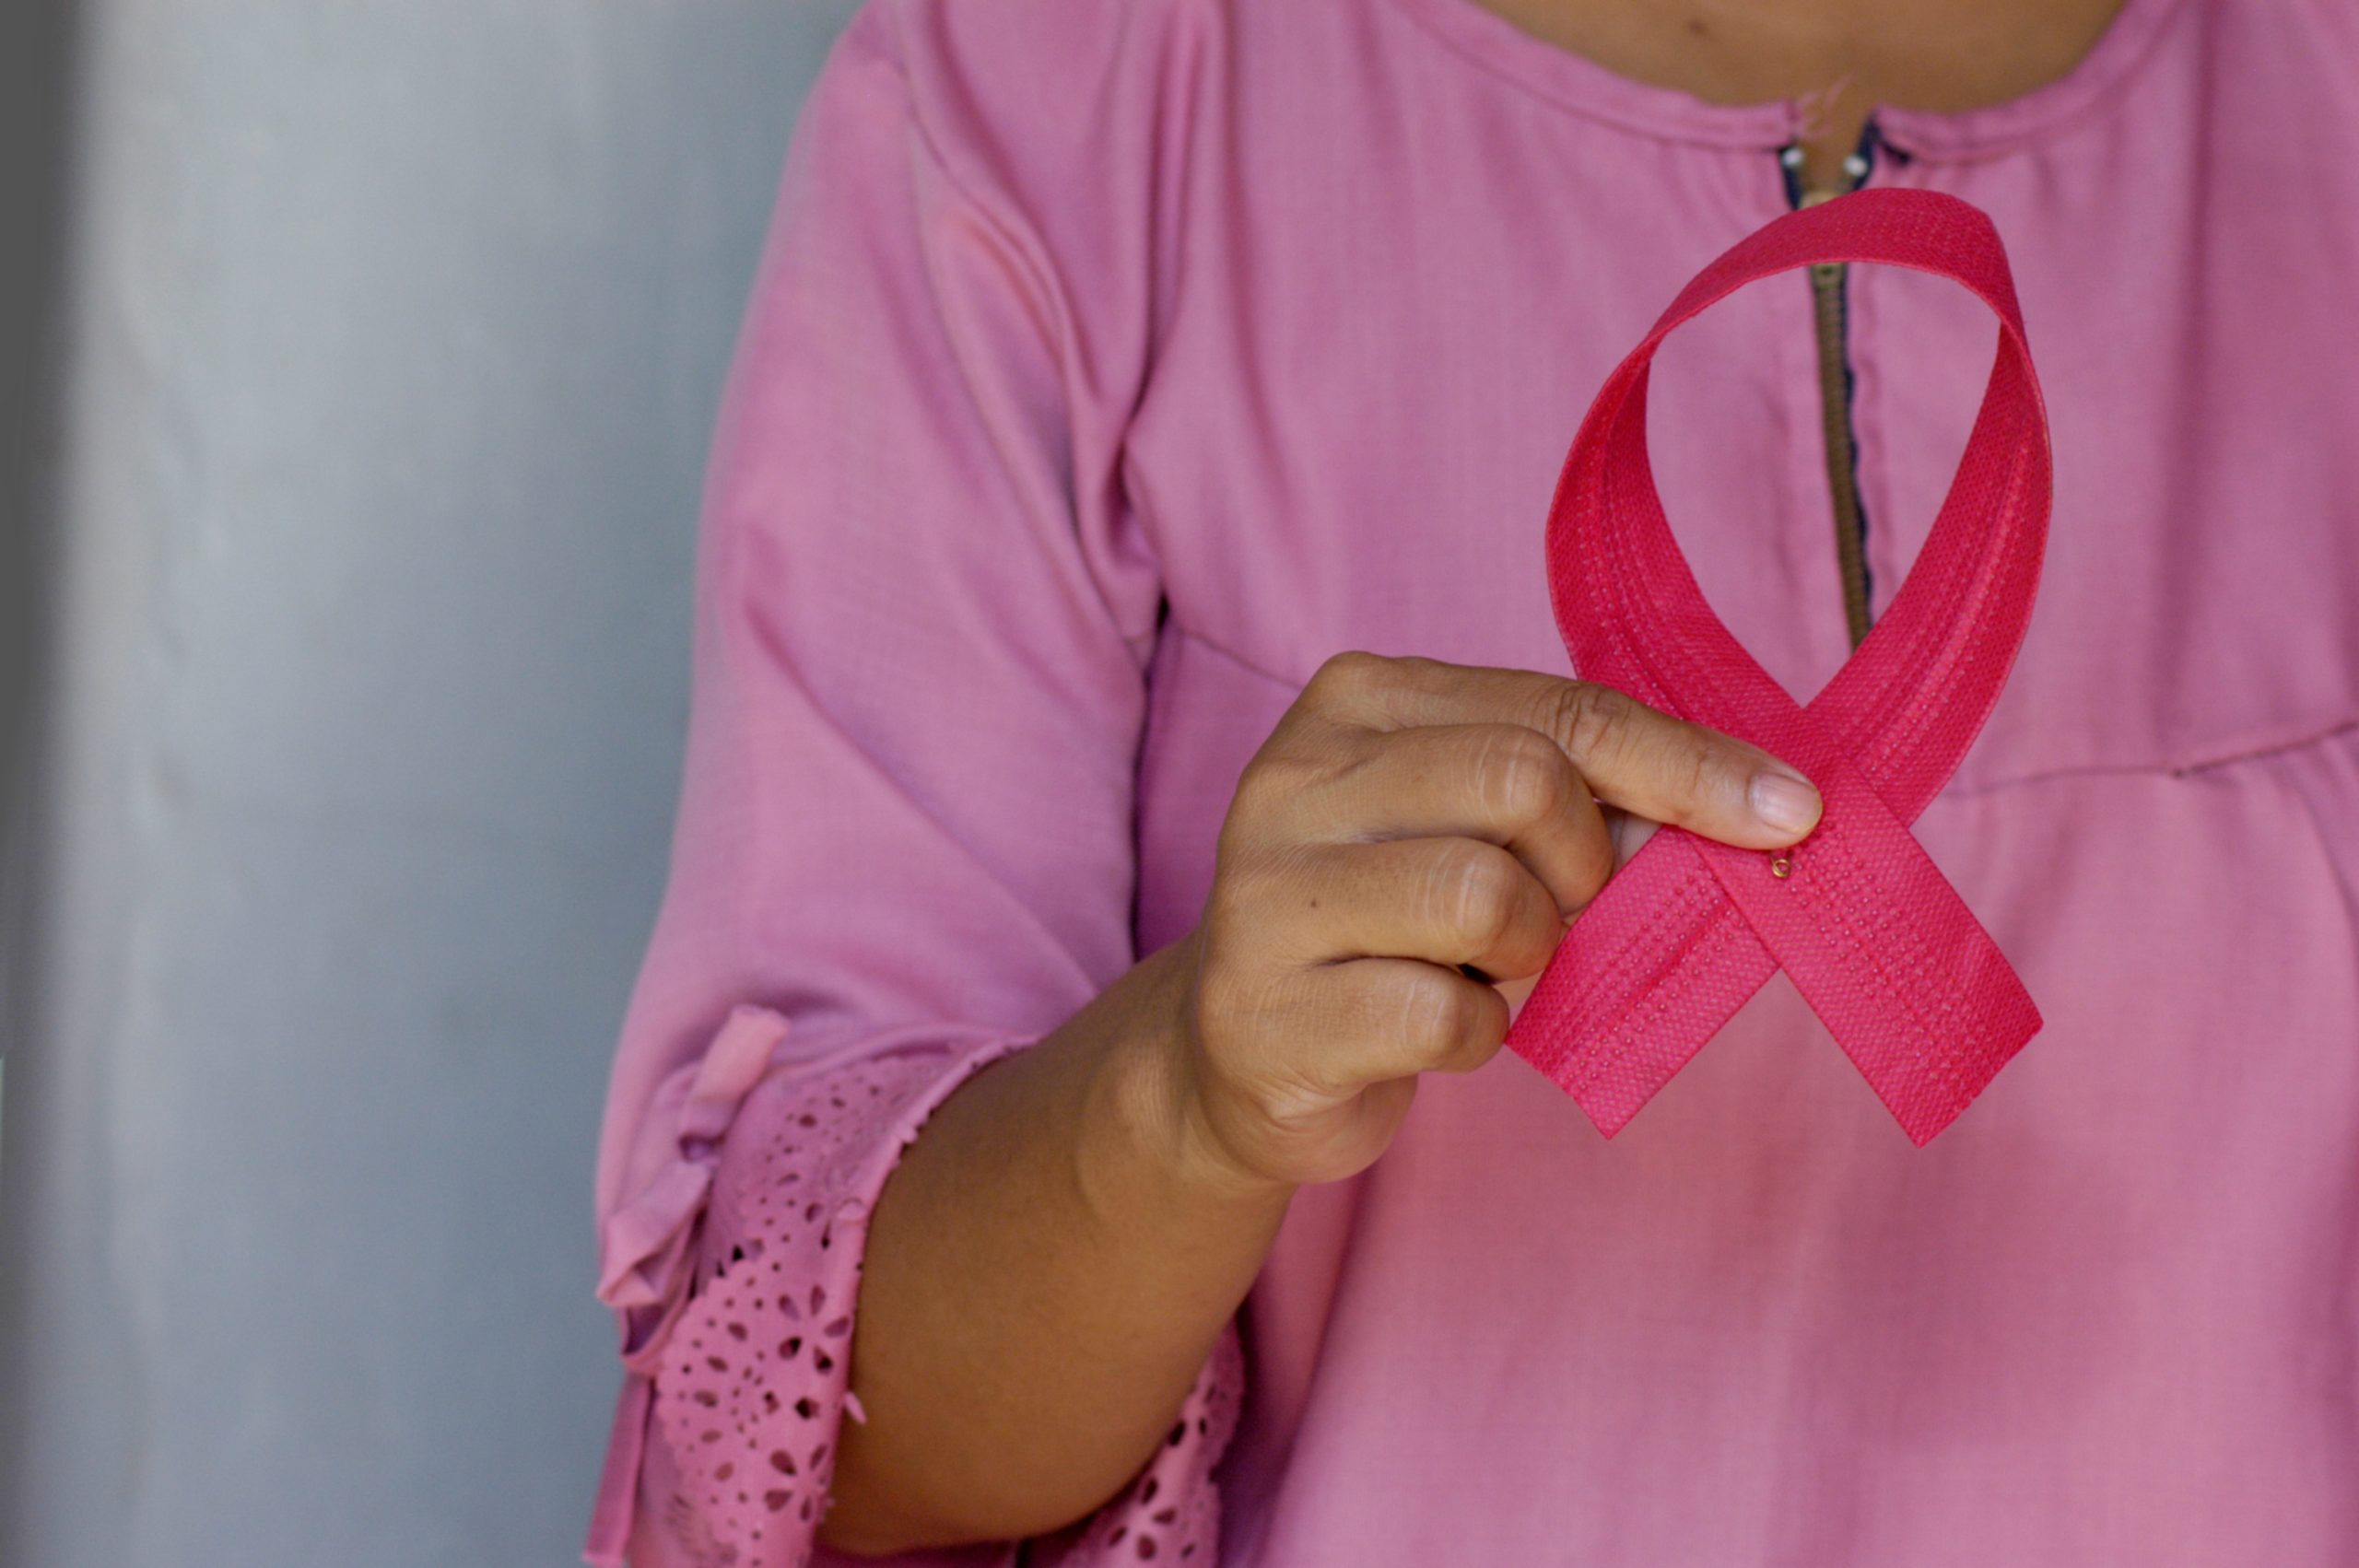 woman holding breast cancer ribbon for risk factors for breast cancer